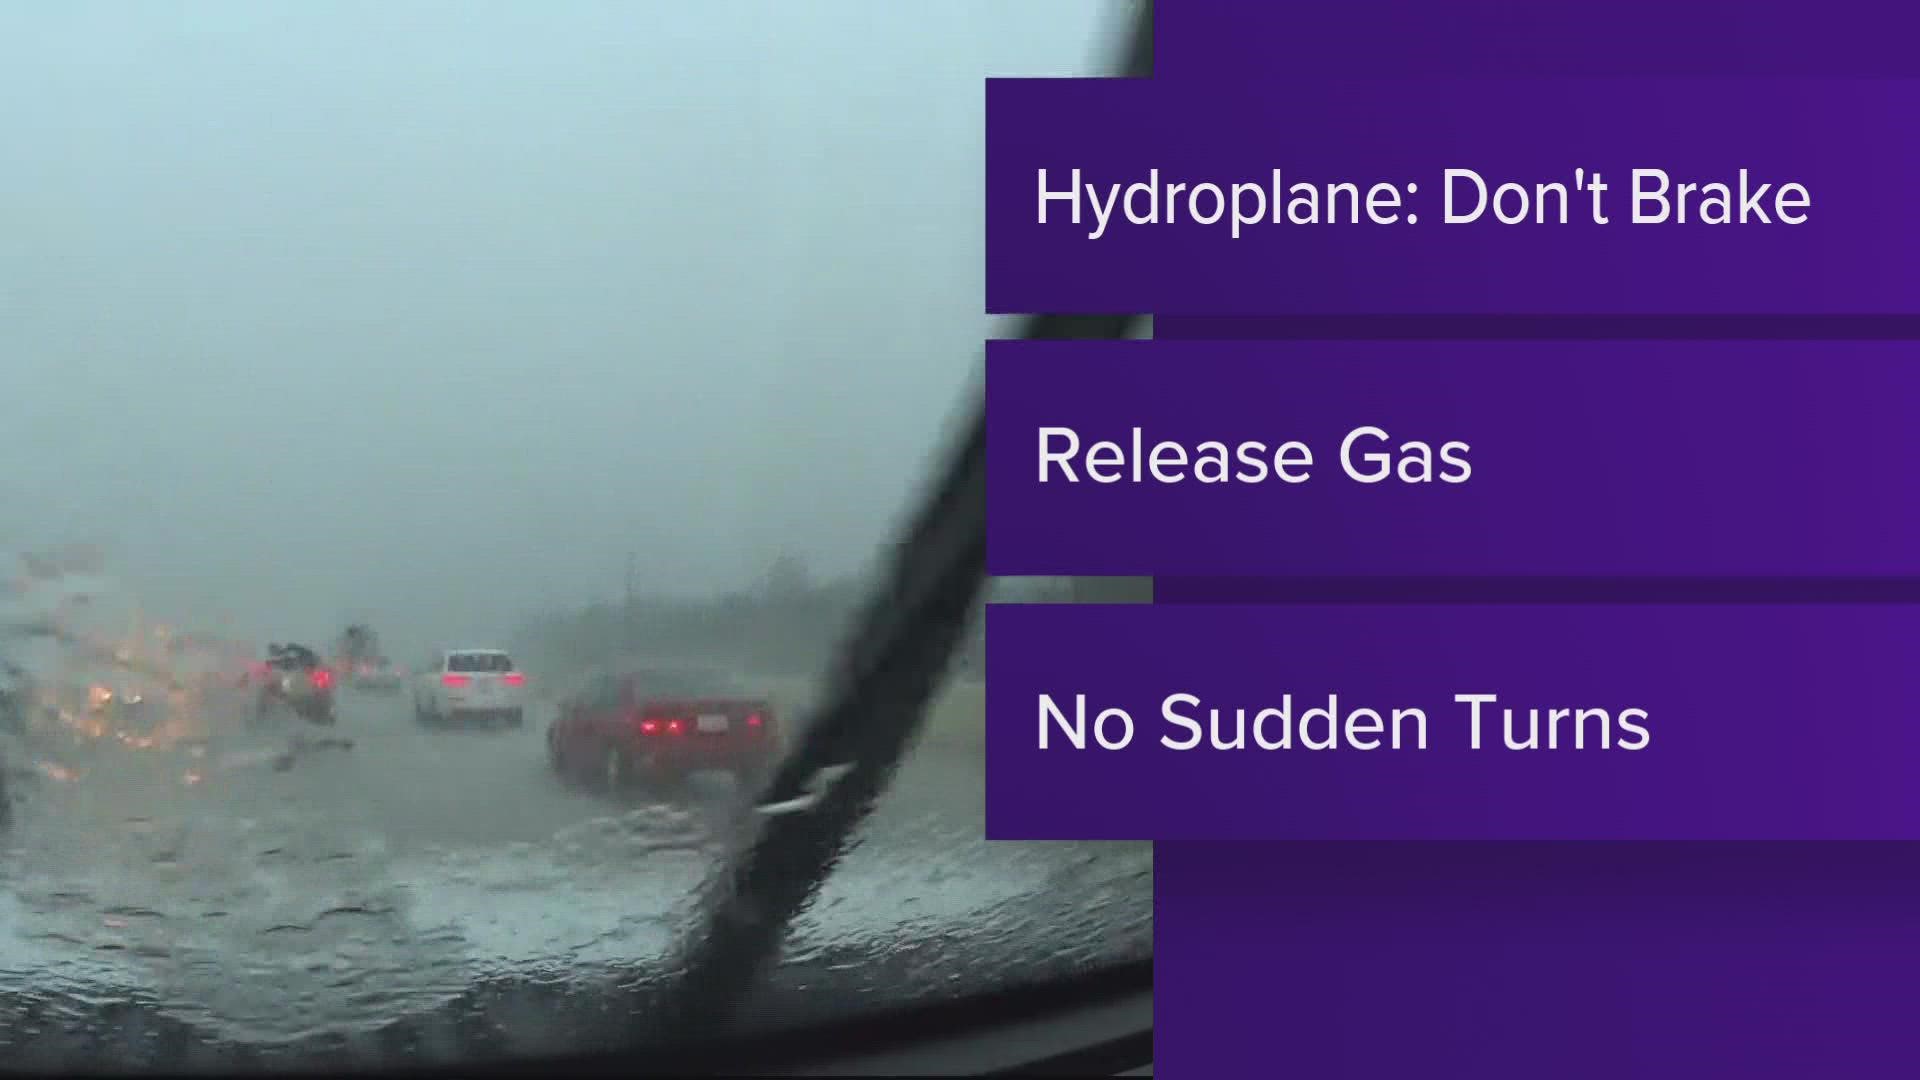 KHOU 11's Shern-Min Chow has some reminders for what you should do if you start hydroplaning.